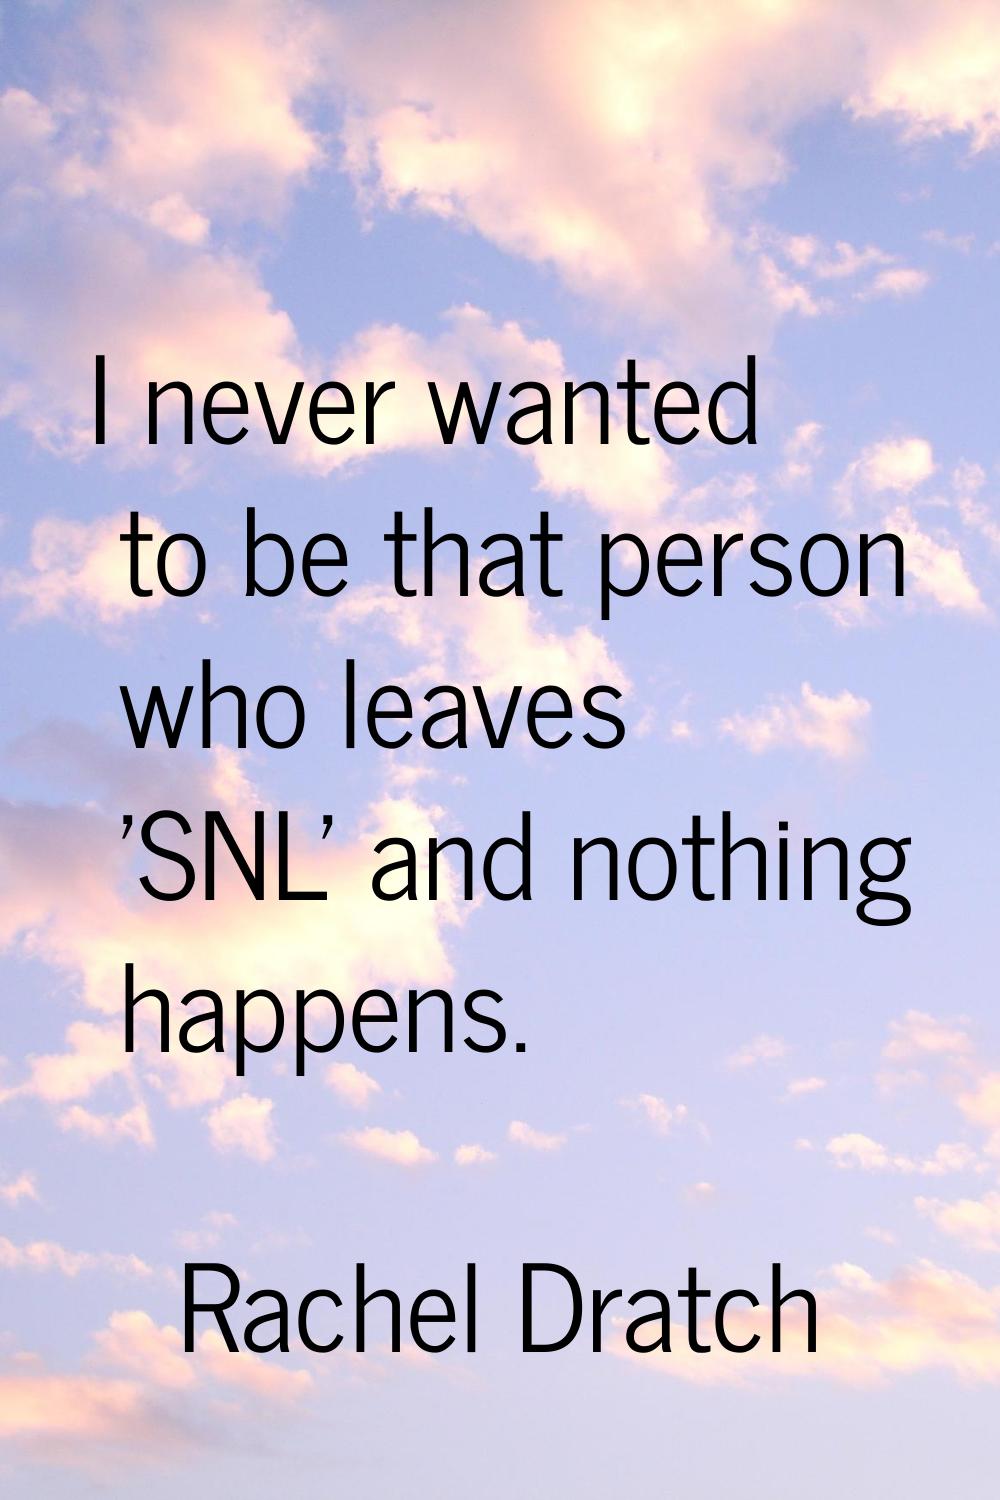 I never wanted to be that person who leaves 'SNL' and nothing happens.